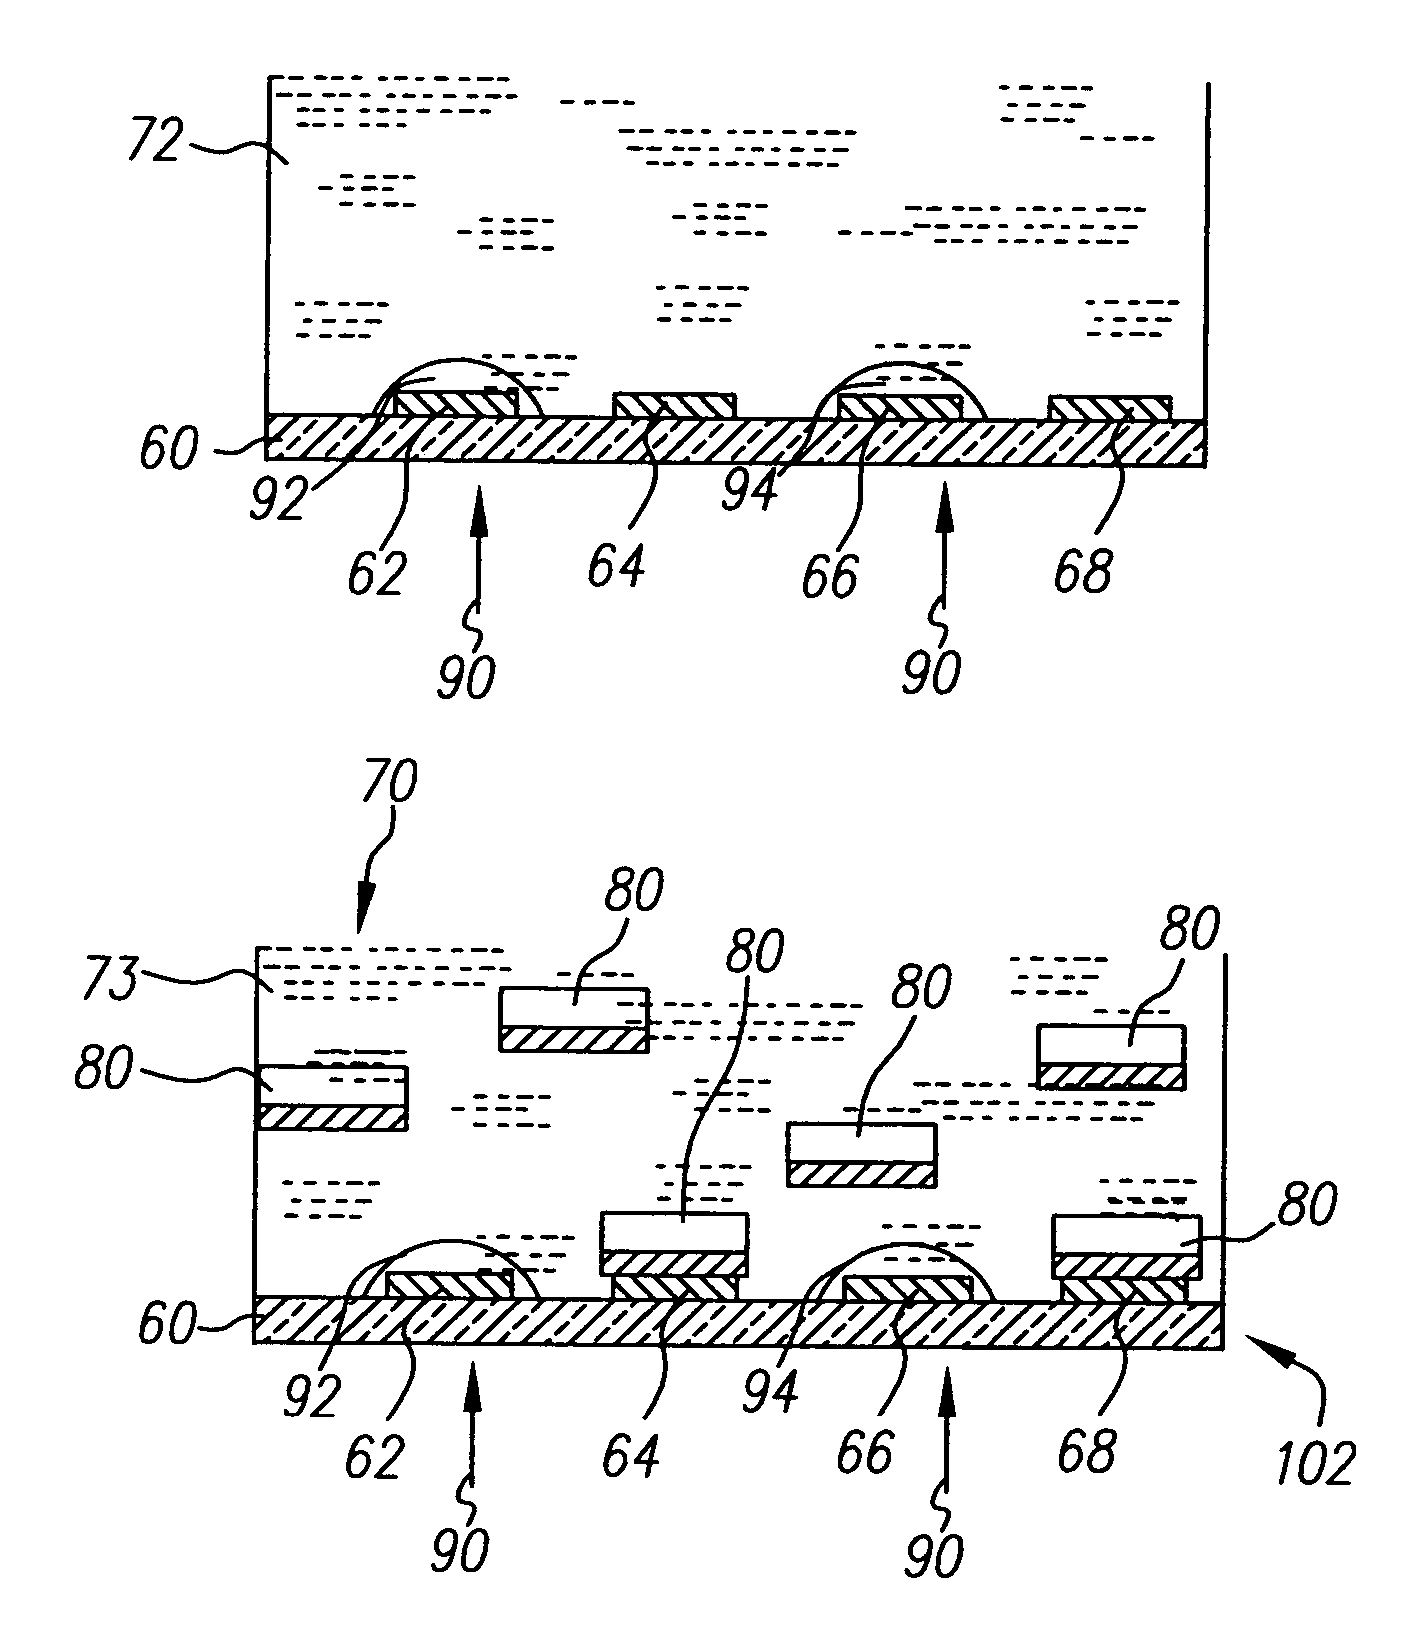 Method for assembling micro-components to binding sites